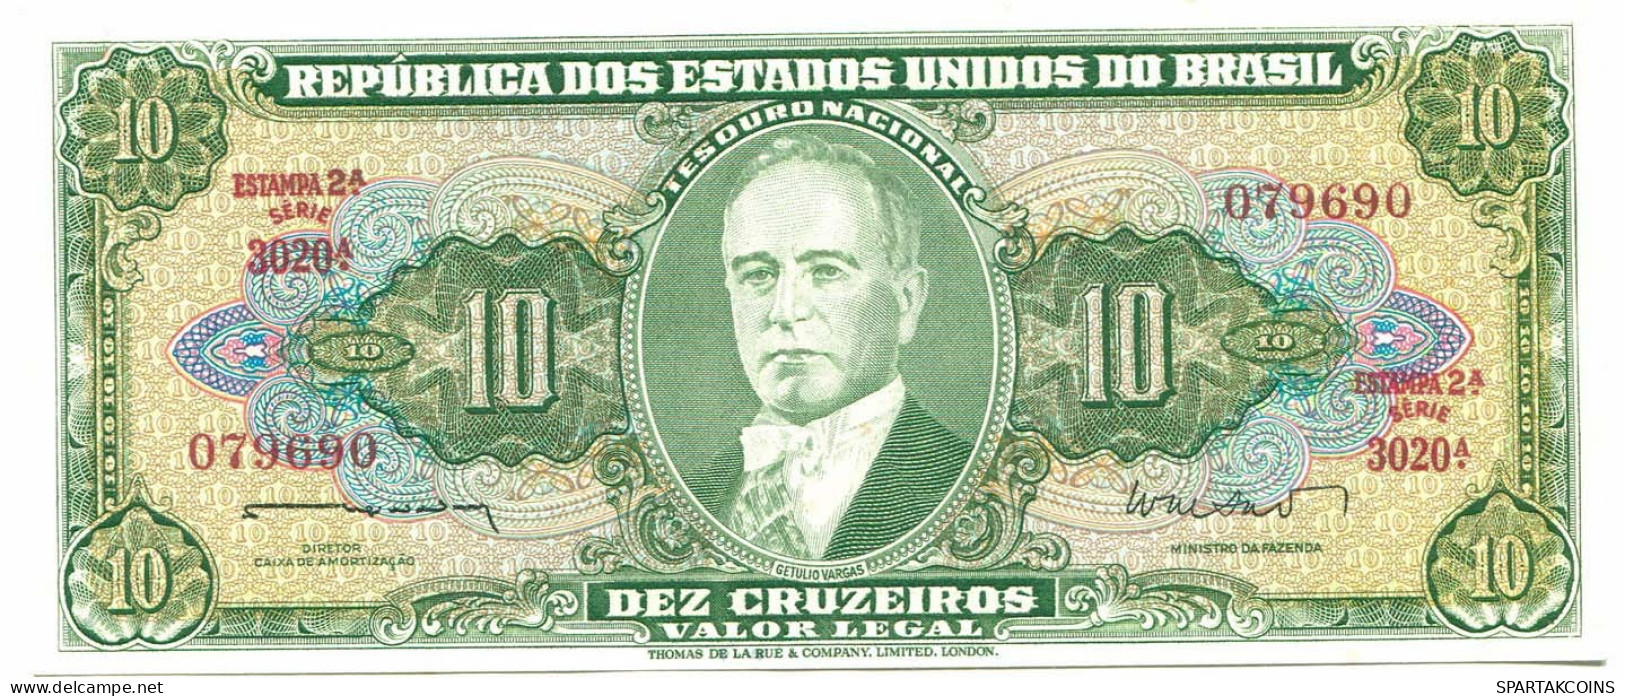 BRASIL 10 CRUZEIROS 1963 SERIE 3020A UNC Paper Money Banknote #P10835.4 - [11] Local Banknote Issues